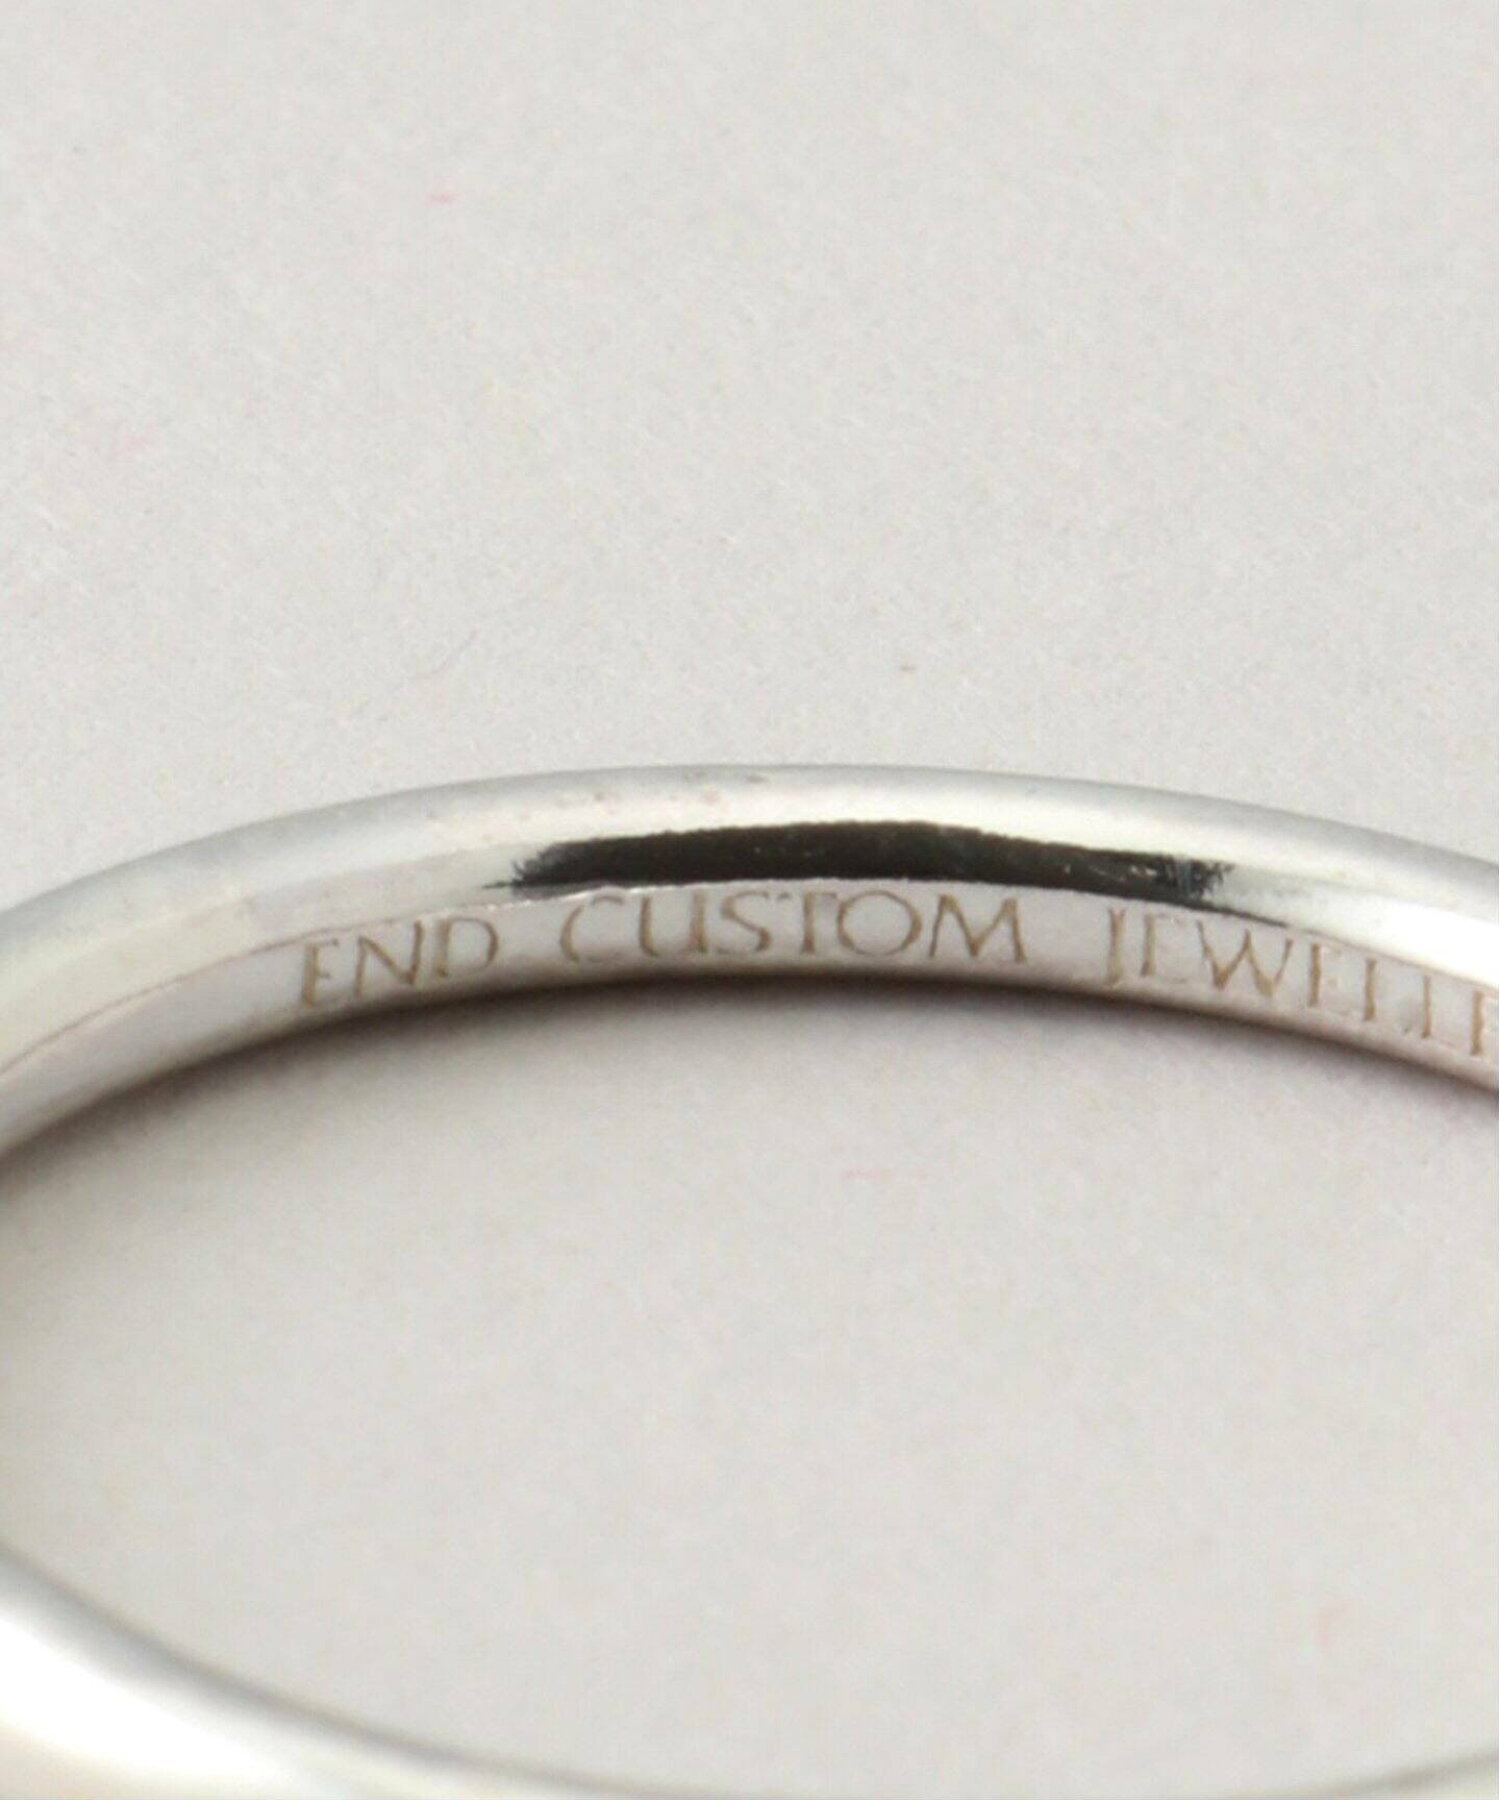 【 END CUSTOM JEWELLERS / エンド 】3 Stack Silver Ring